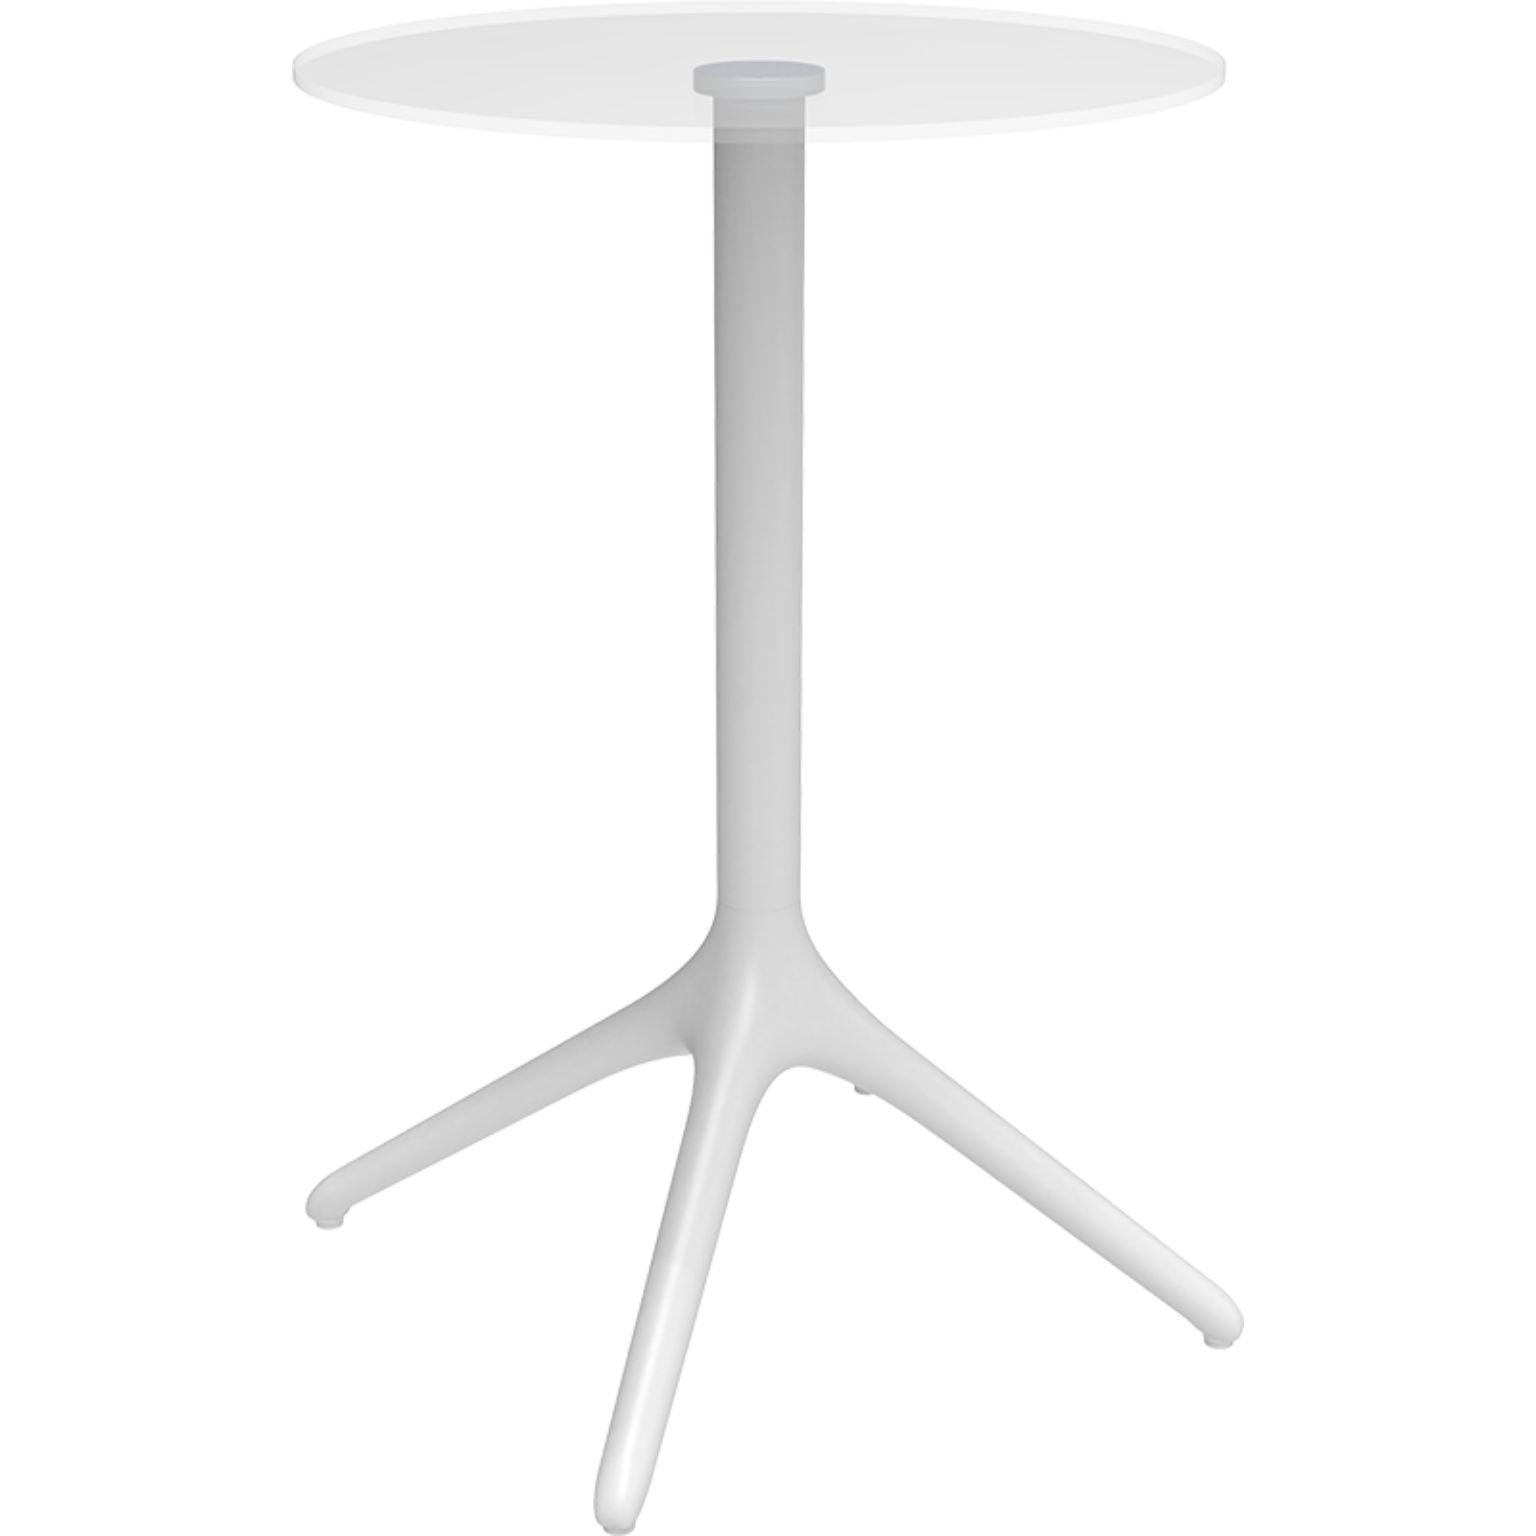 Uni white table XL 105 by MOWEE.
Dimensions: D50 x H105 cm
Material: aluminium, tempered glass
Weight: 9.7 kg
Also available in different colours and finishes. 

A table designed to be as versatile as possible and can coexist with a variety of